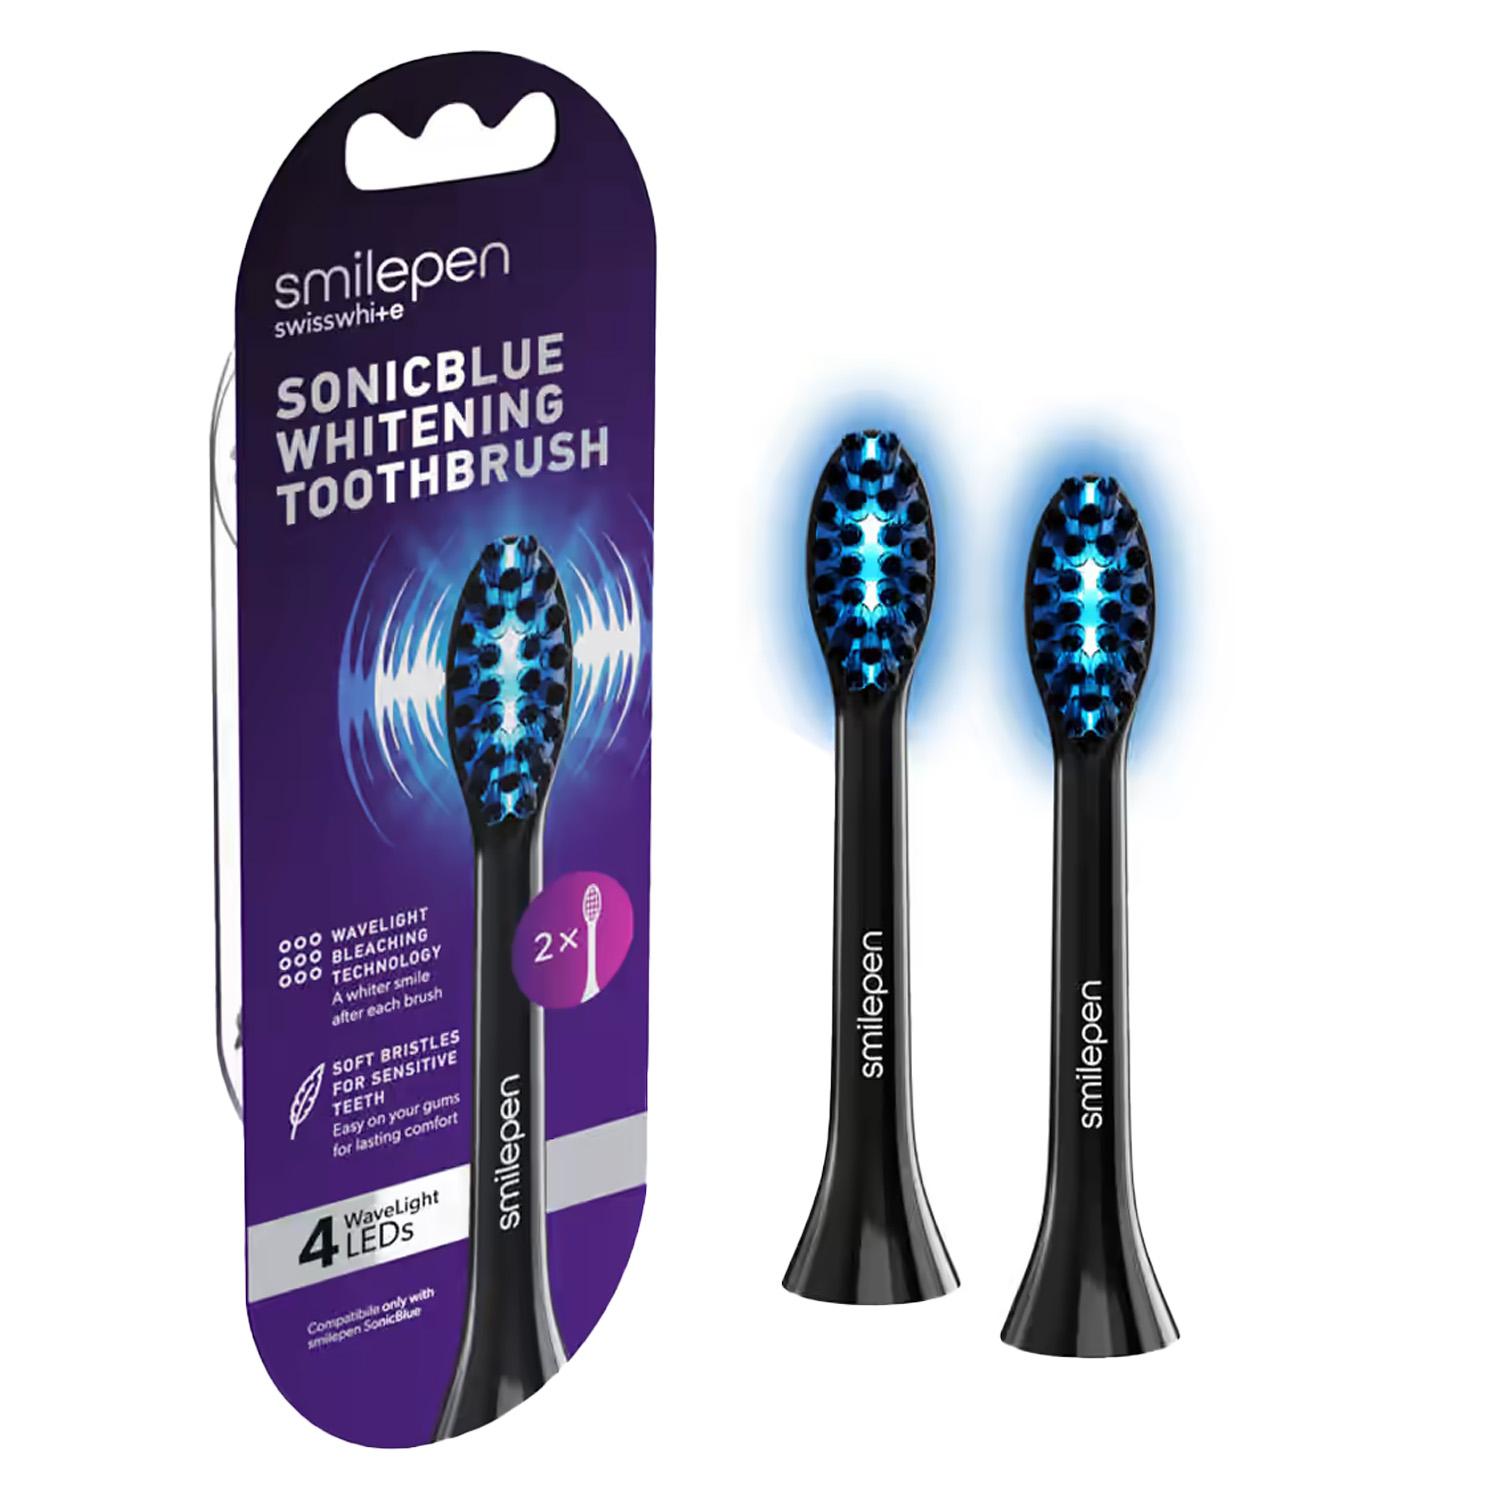 smilepen - Sonicblue Whitening Toothbrush Replacement Bristles 6 LED